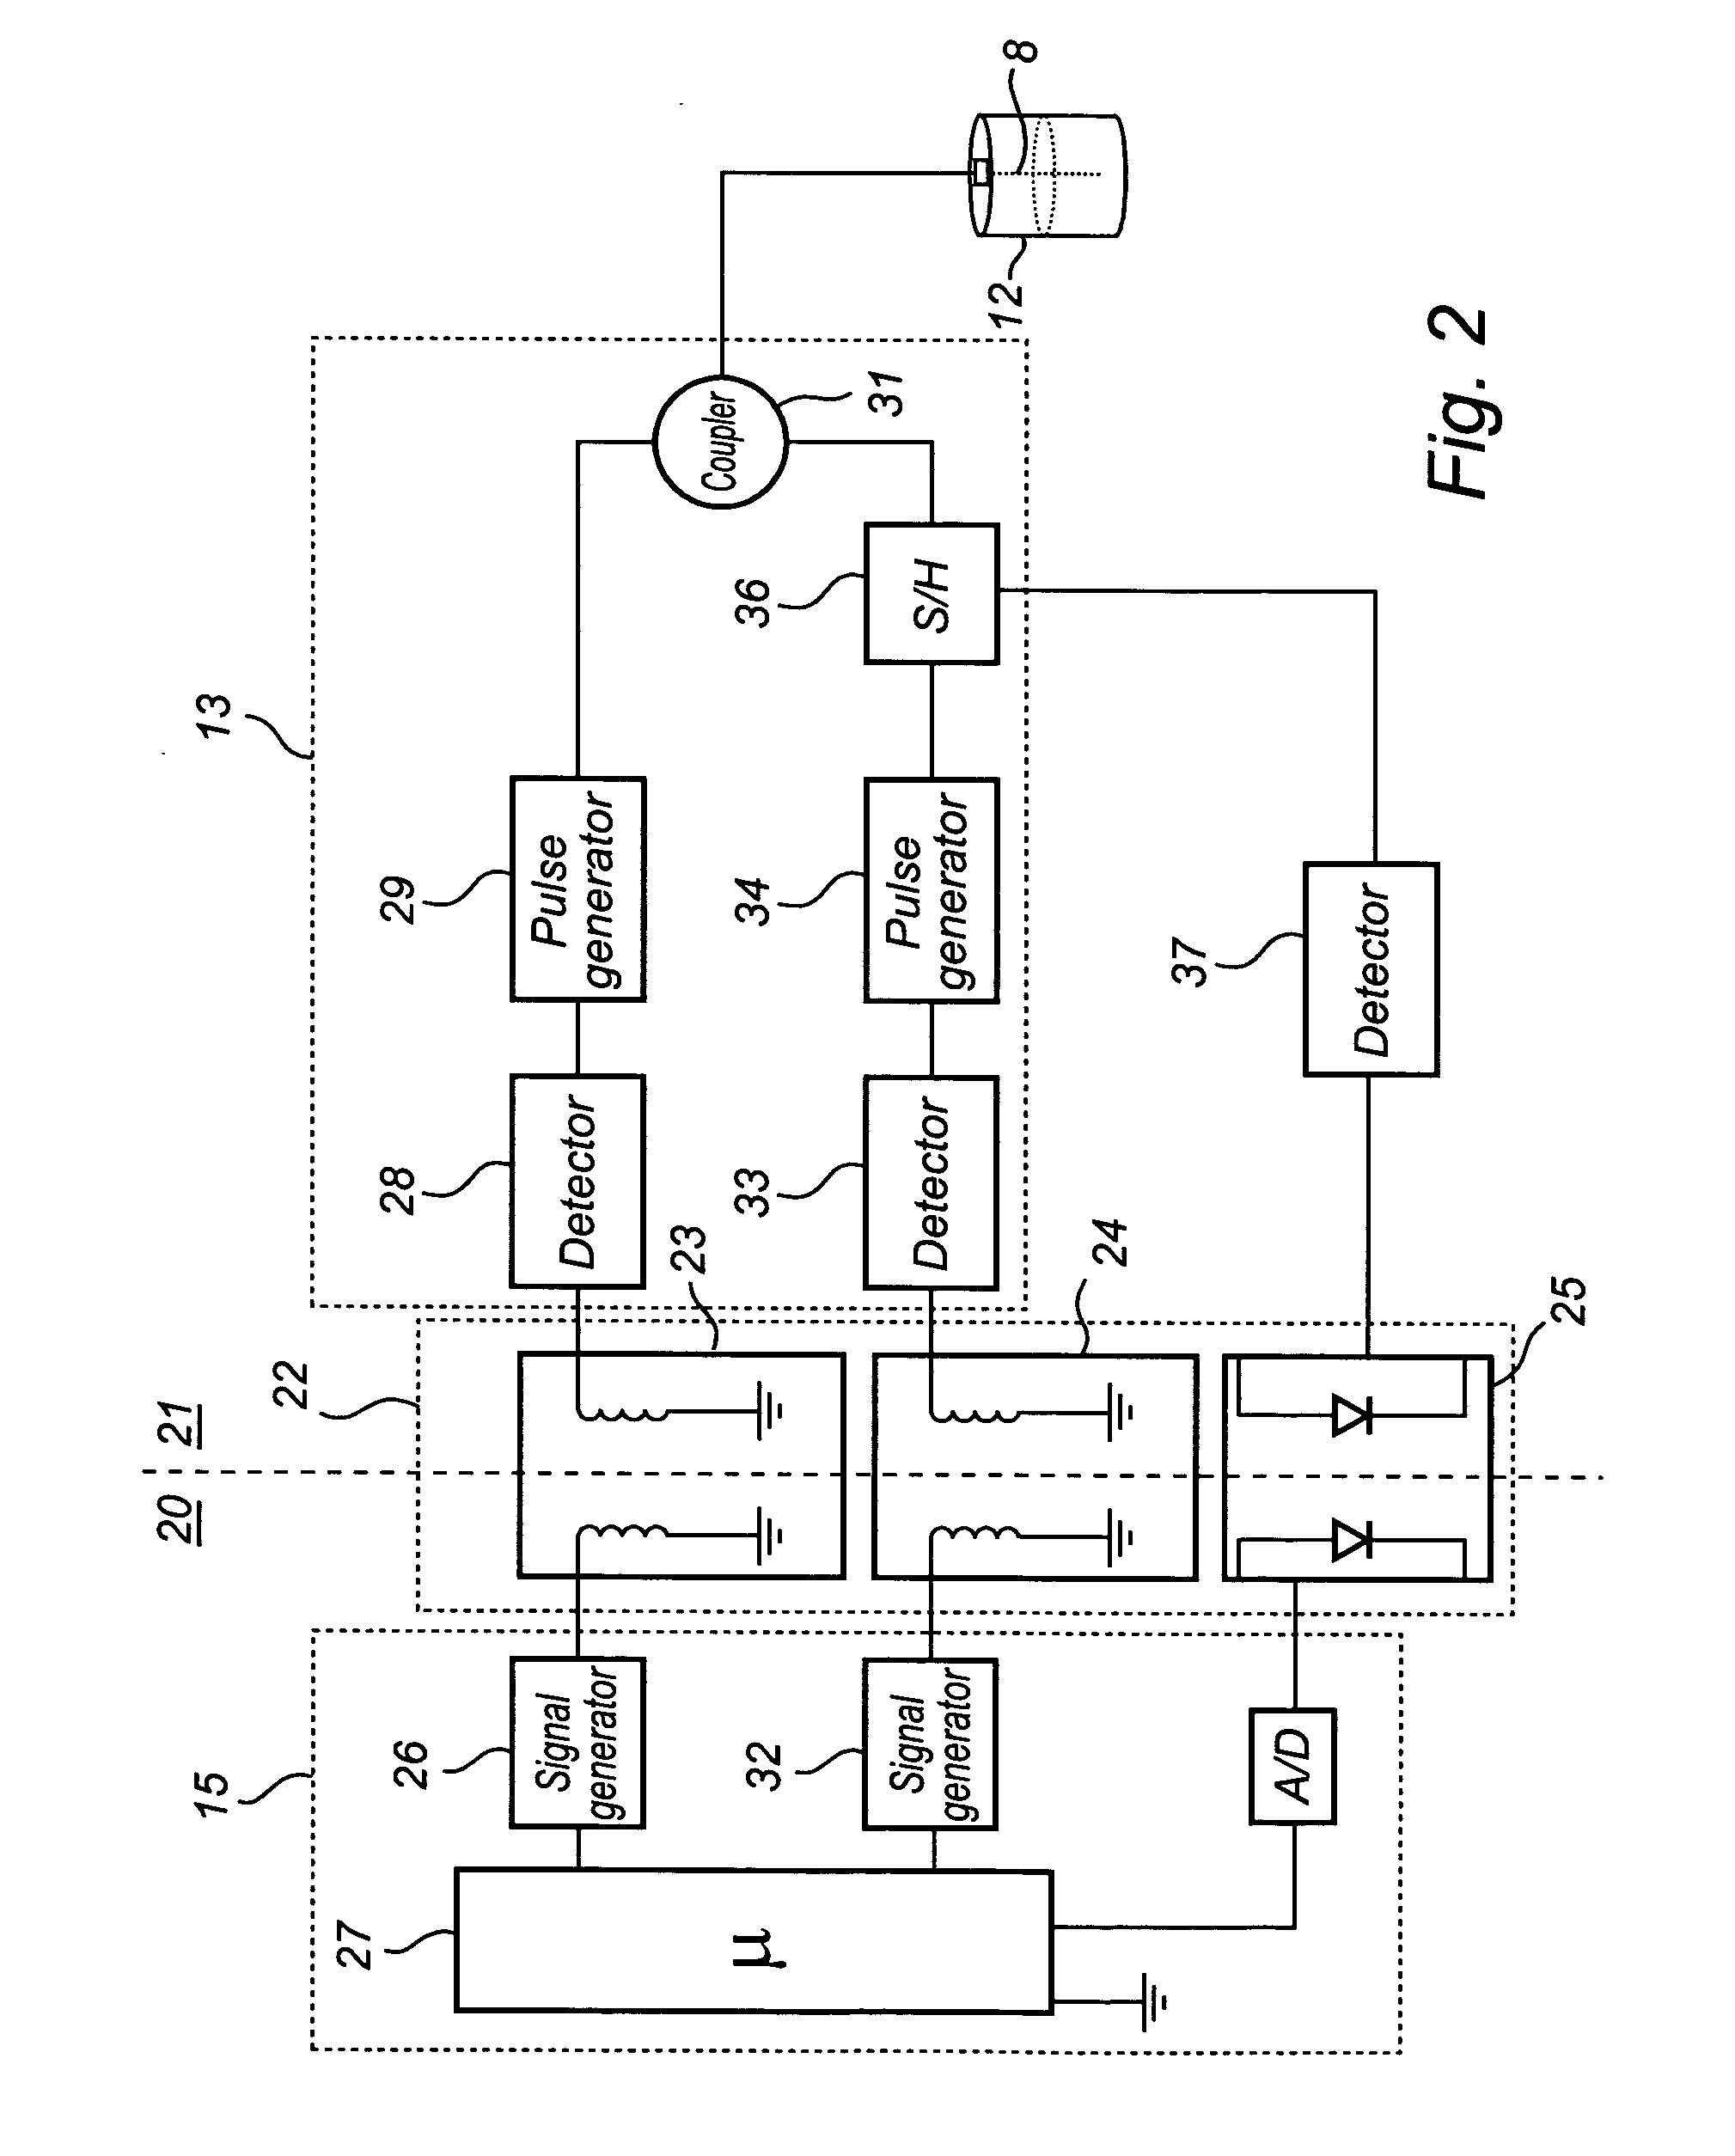 Radar level gauge with a galvanically isolated interface